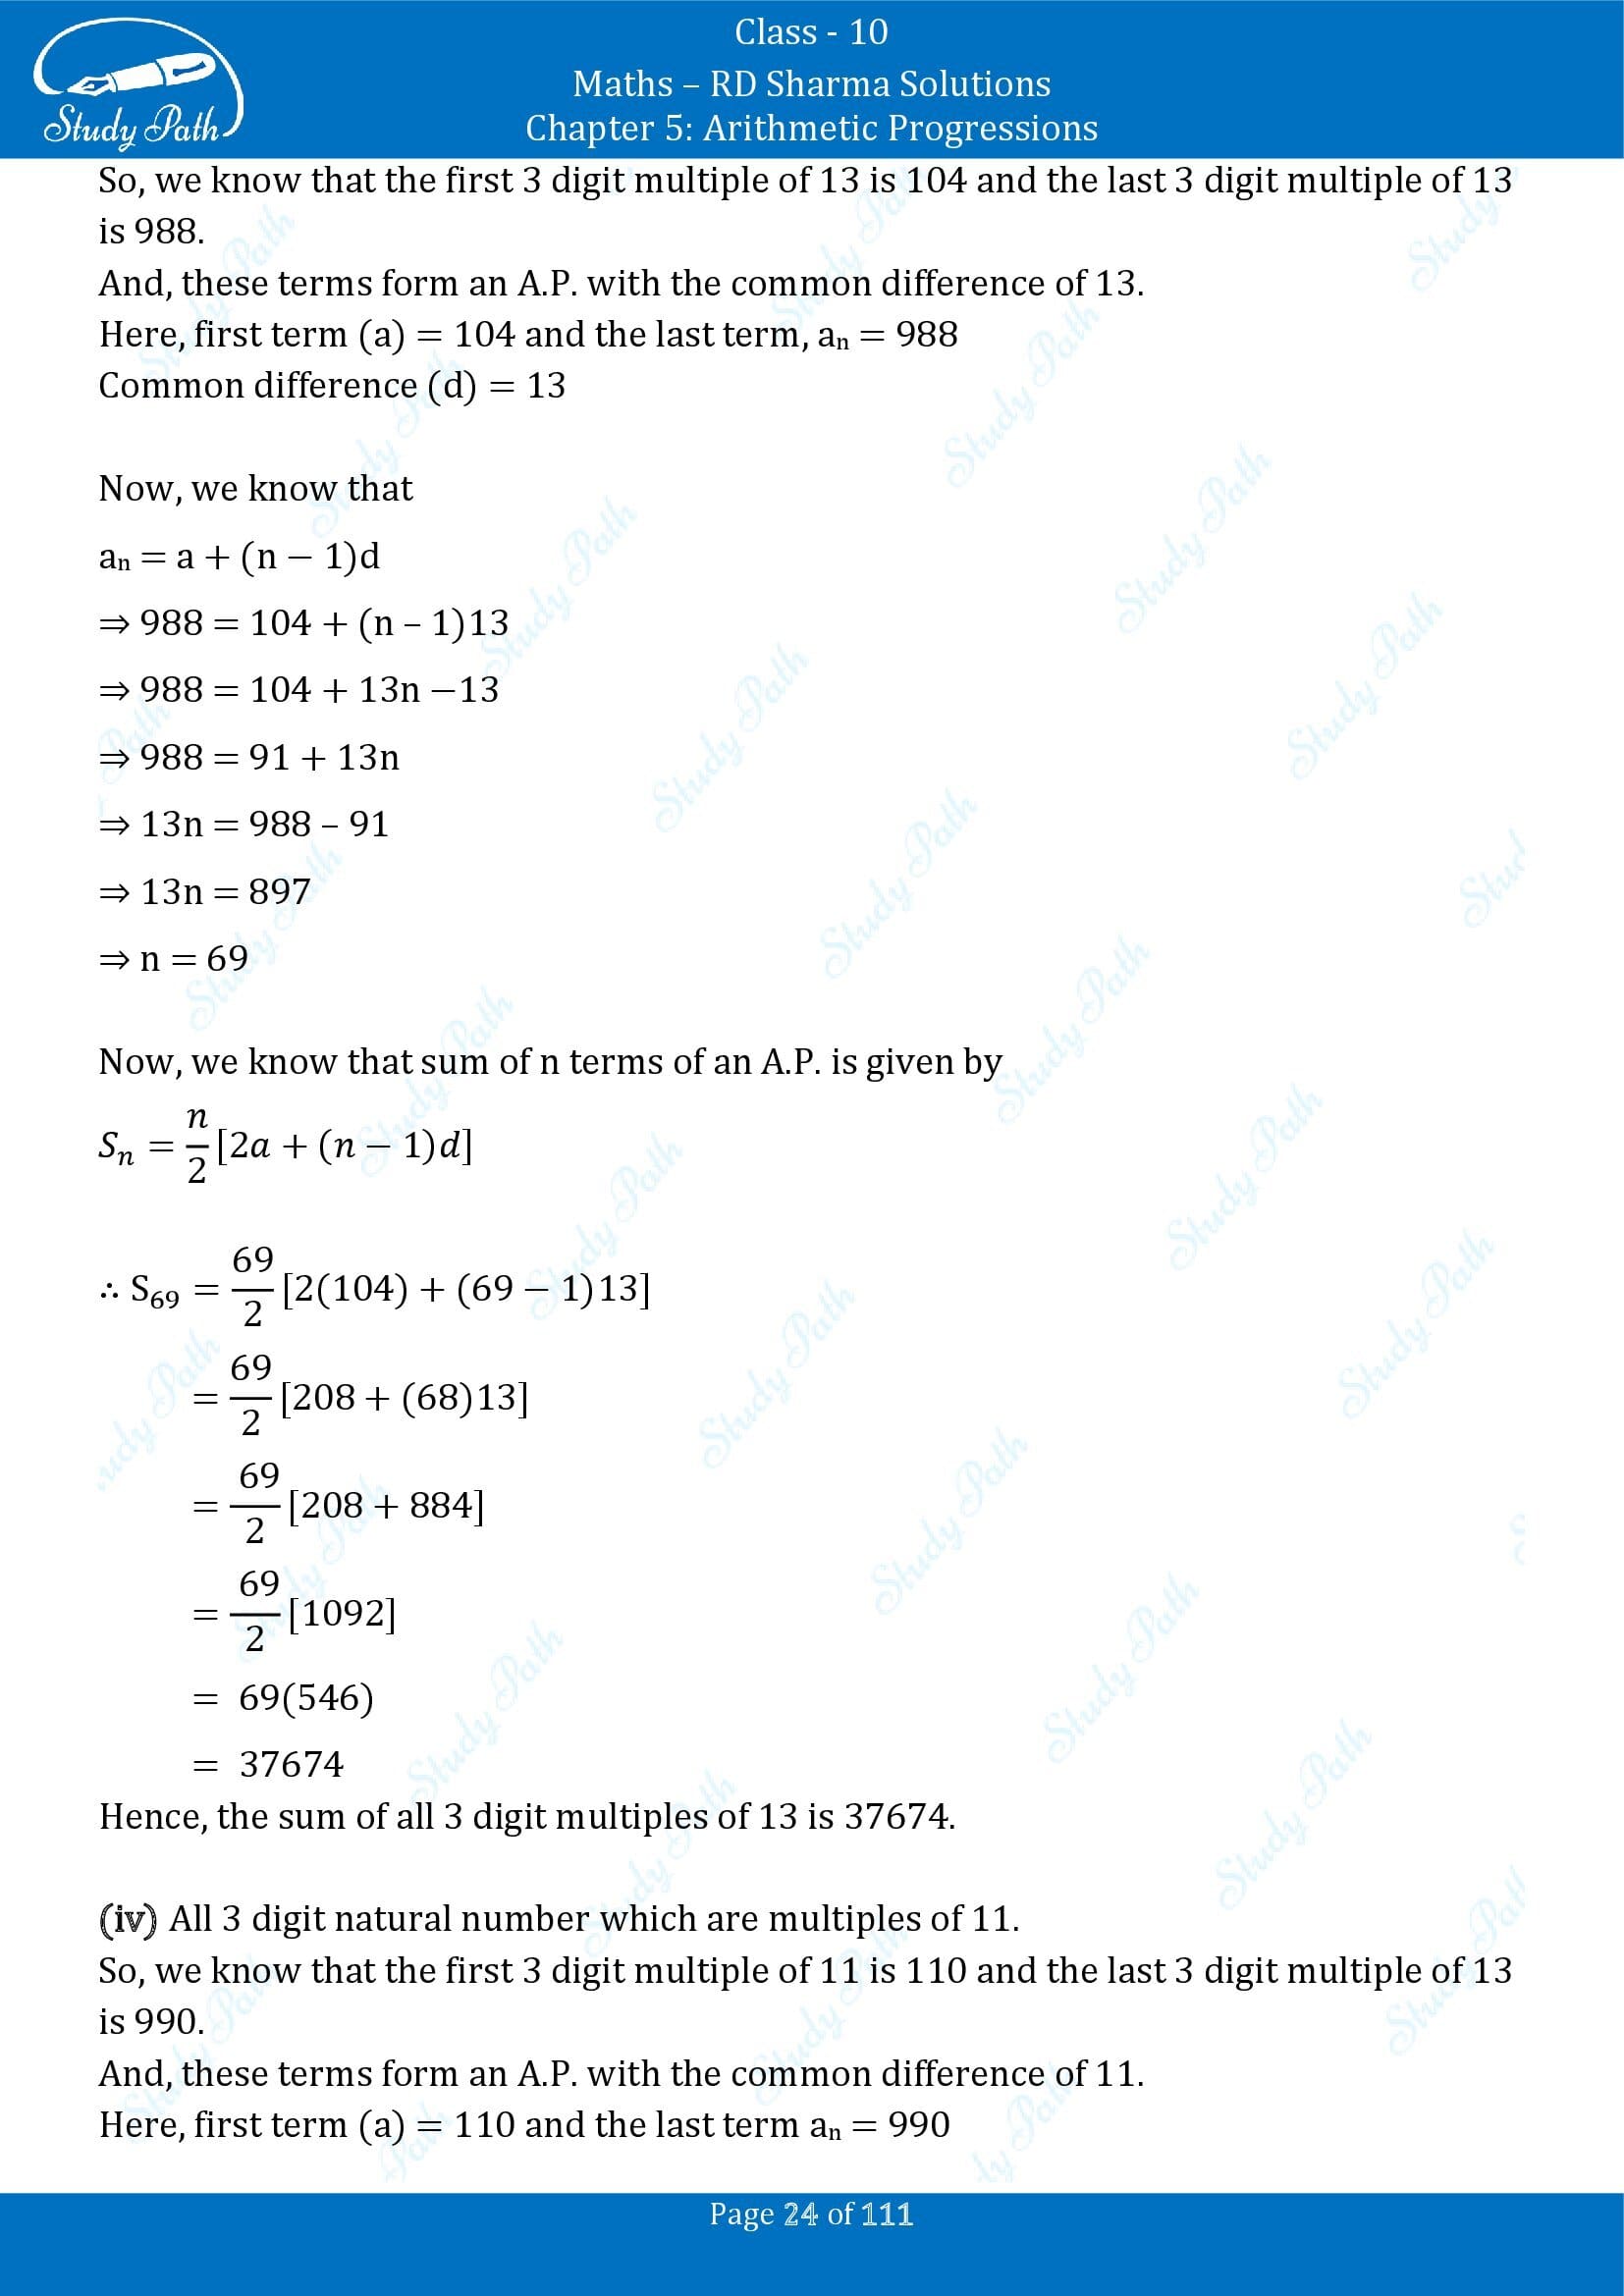 RD Sharma Solutions Class 10 Chapter 5 Arithmetic Progressions Exercise 5.6 00024